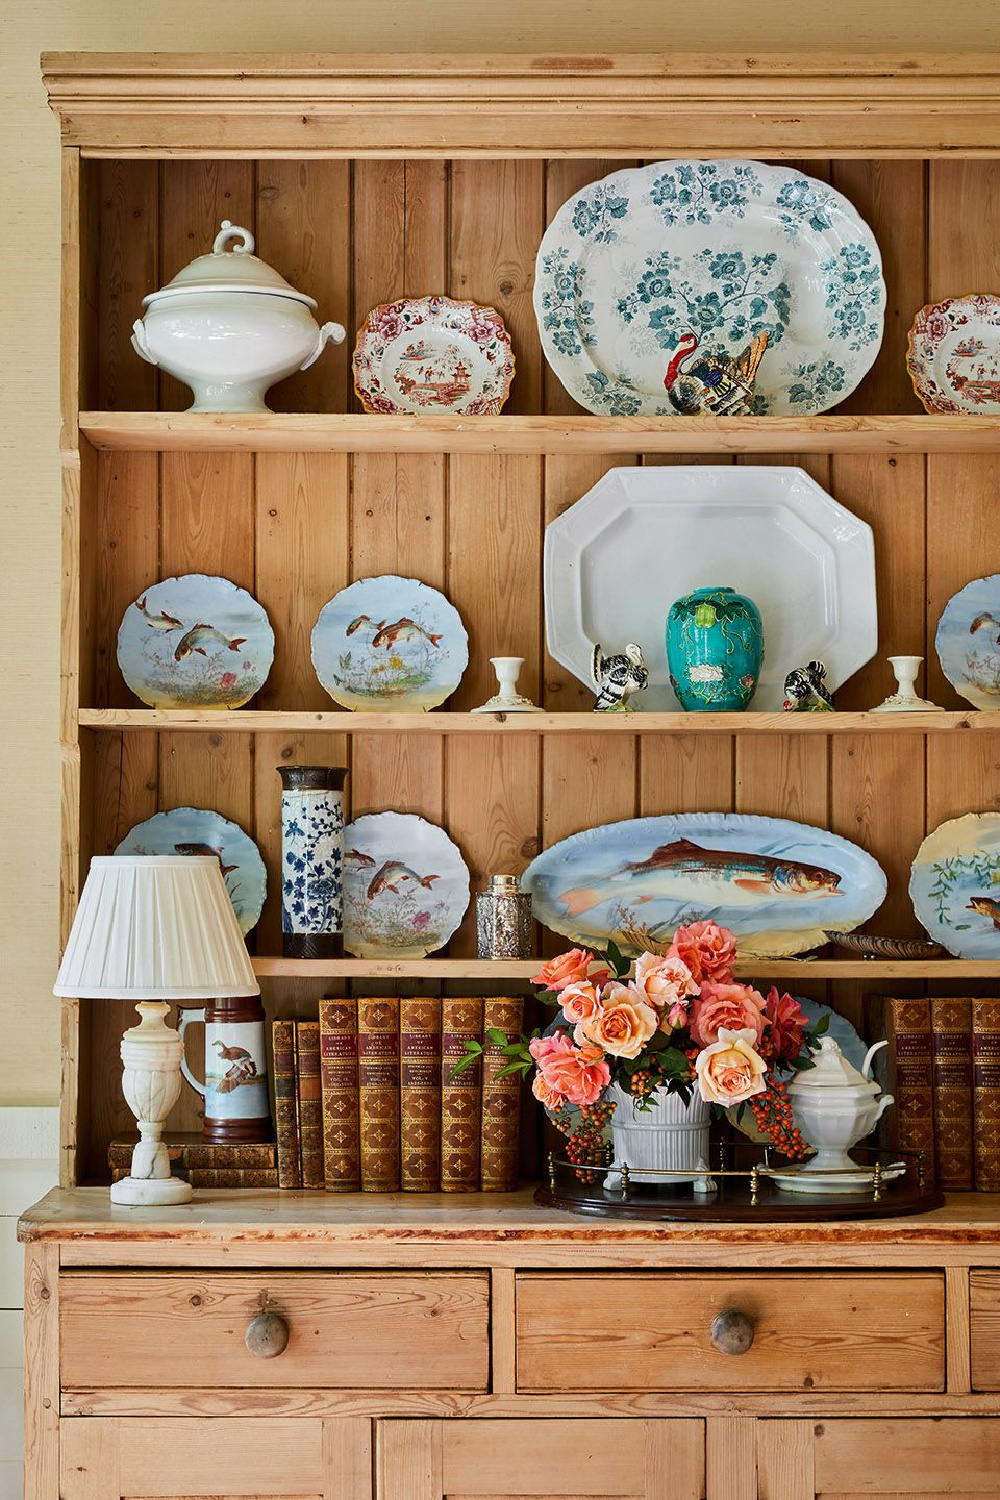 Treasured ironstone and china in dining room cupboard of James Farmer - from CELEBRATING HOME (Gibbs Smith, 2022). #southernhomeinterior